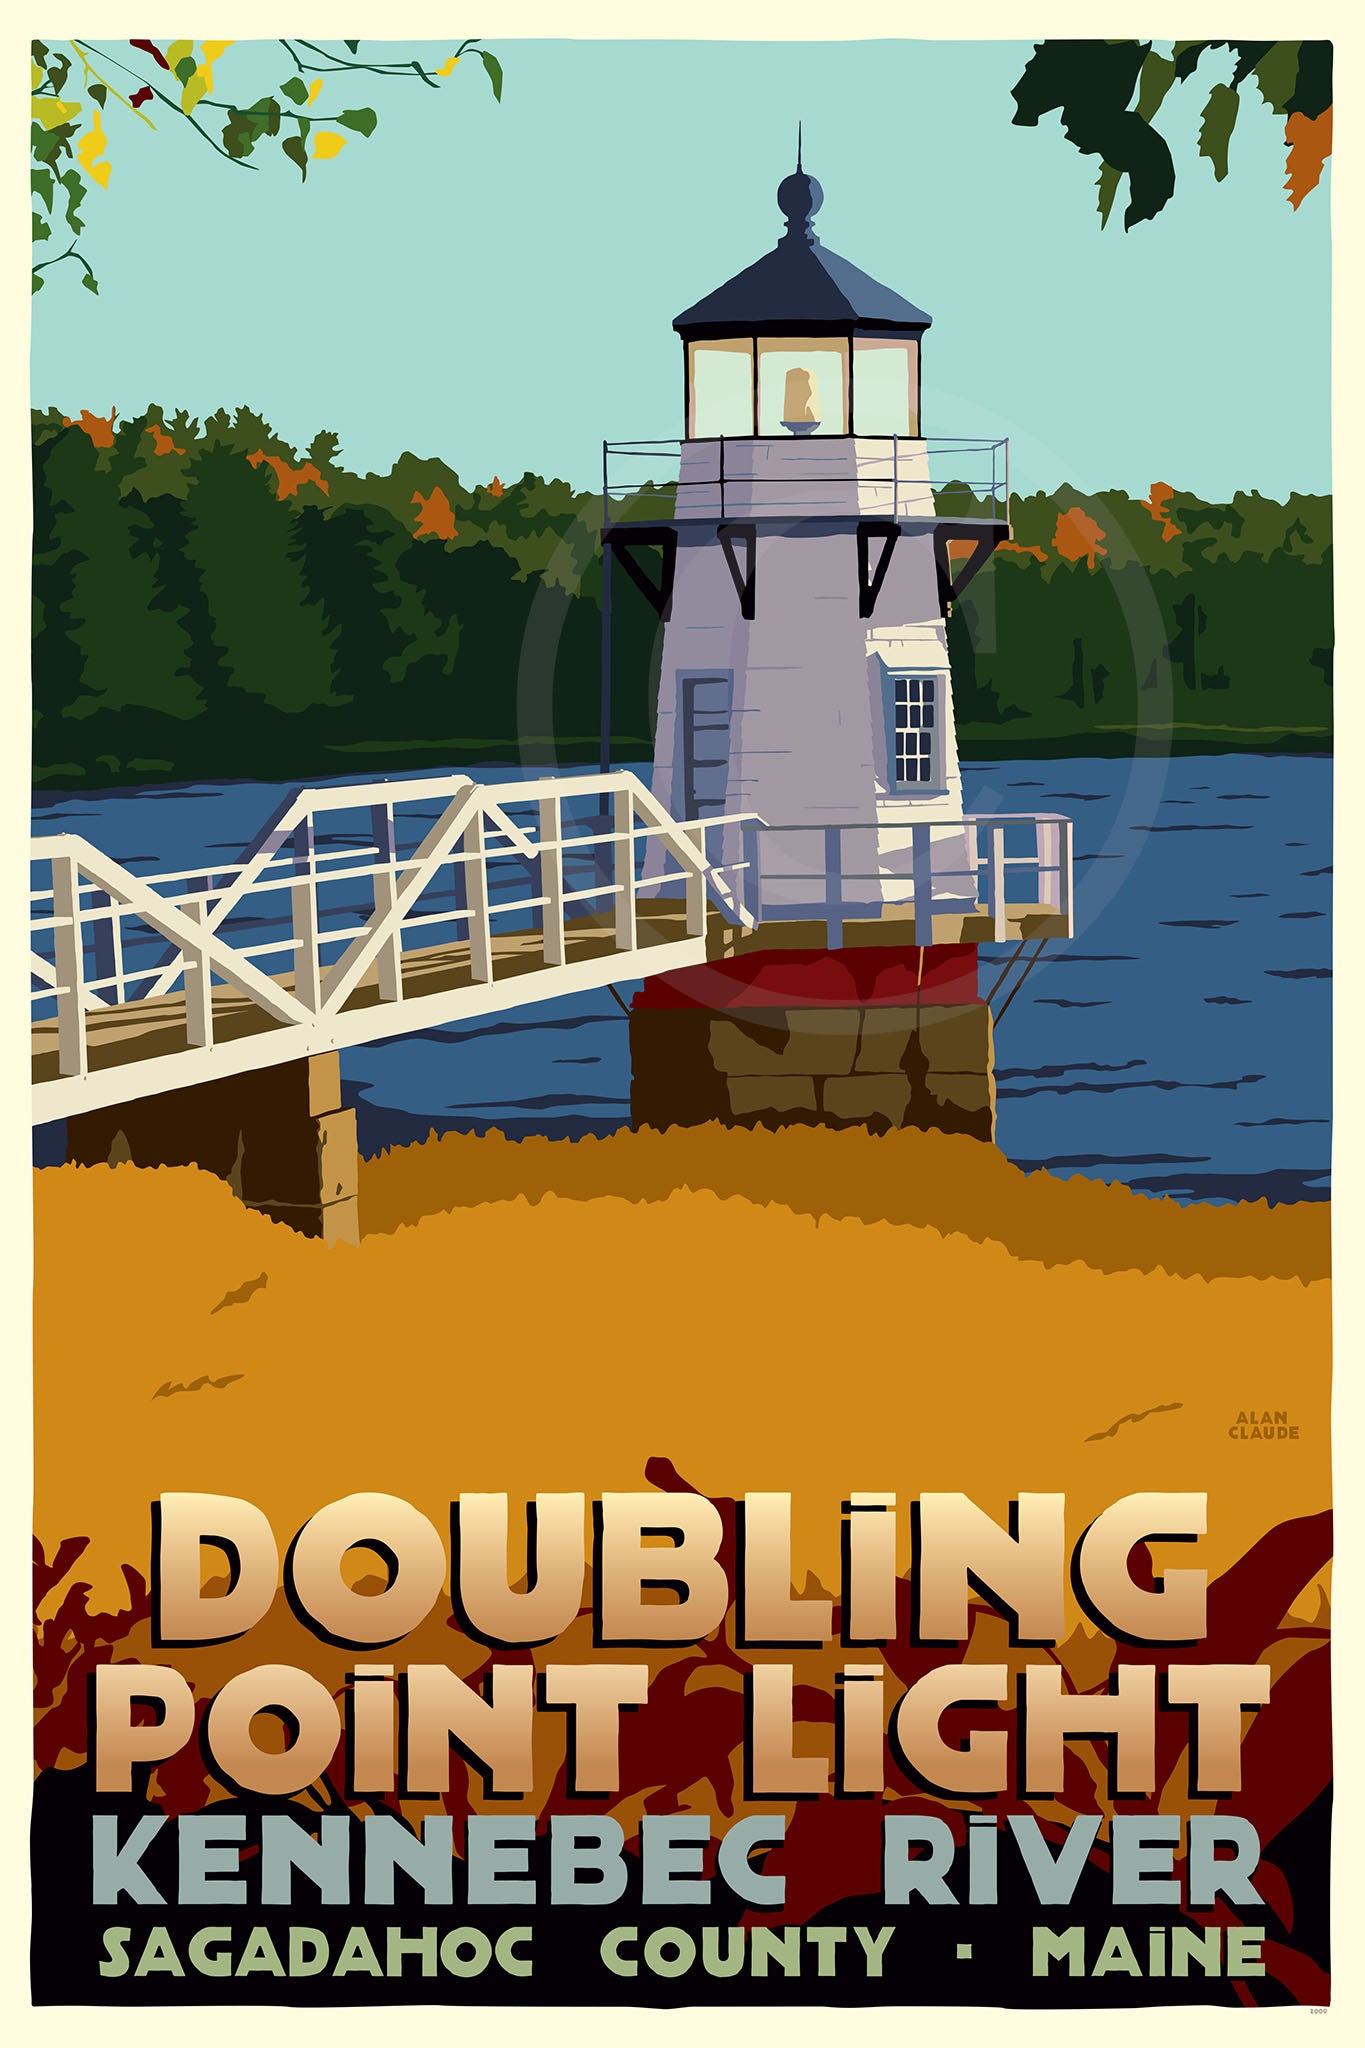 Doubling Point Light Art Print 36" x 53" Travel Poster By Alan Claude - Maine